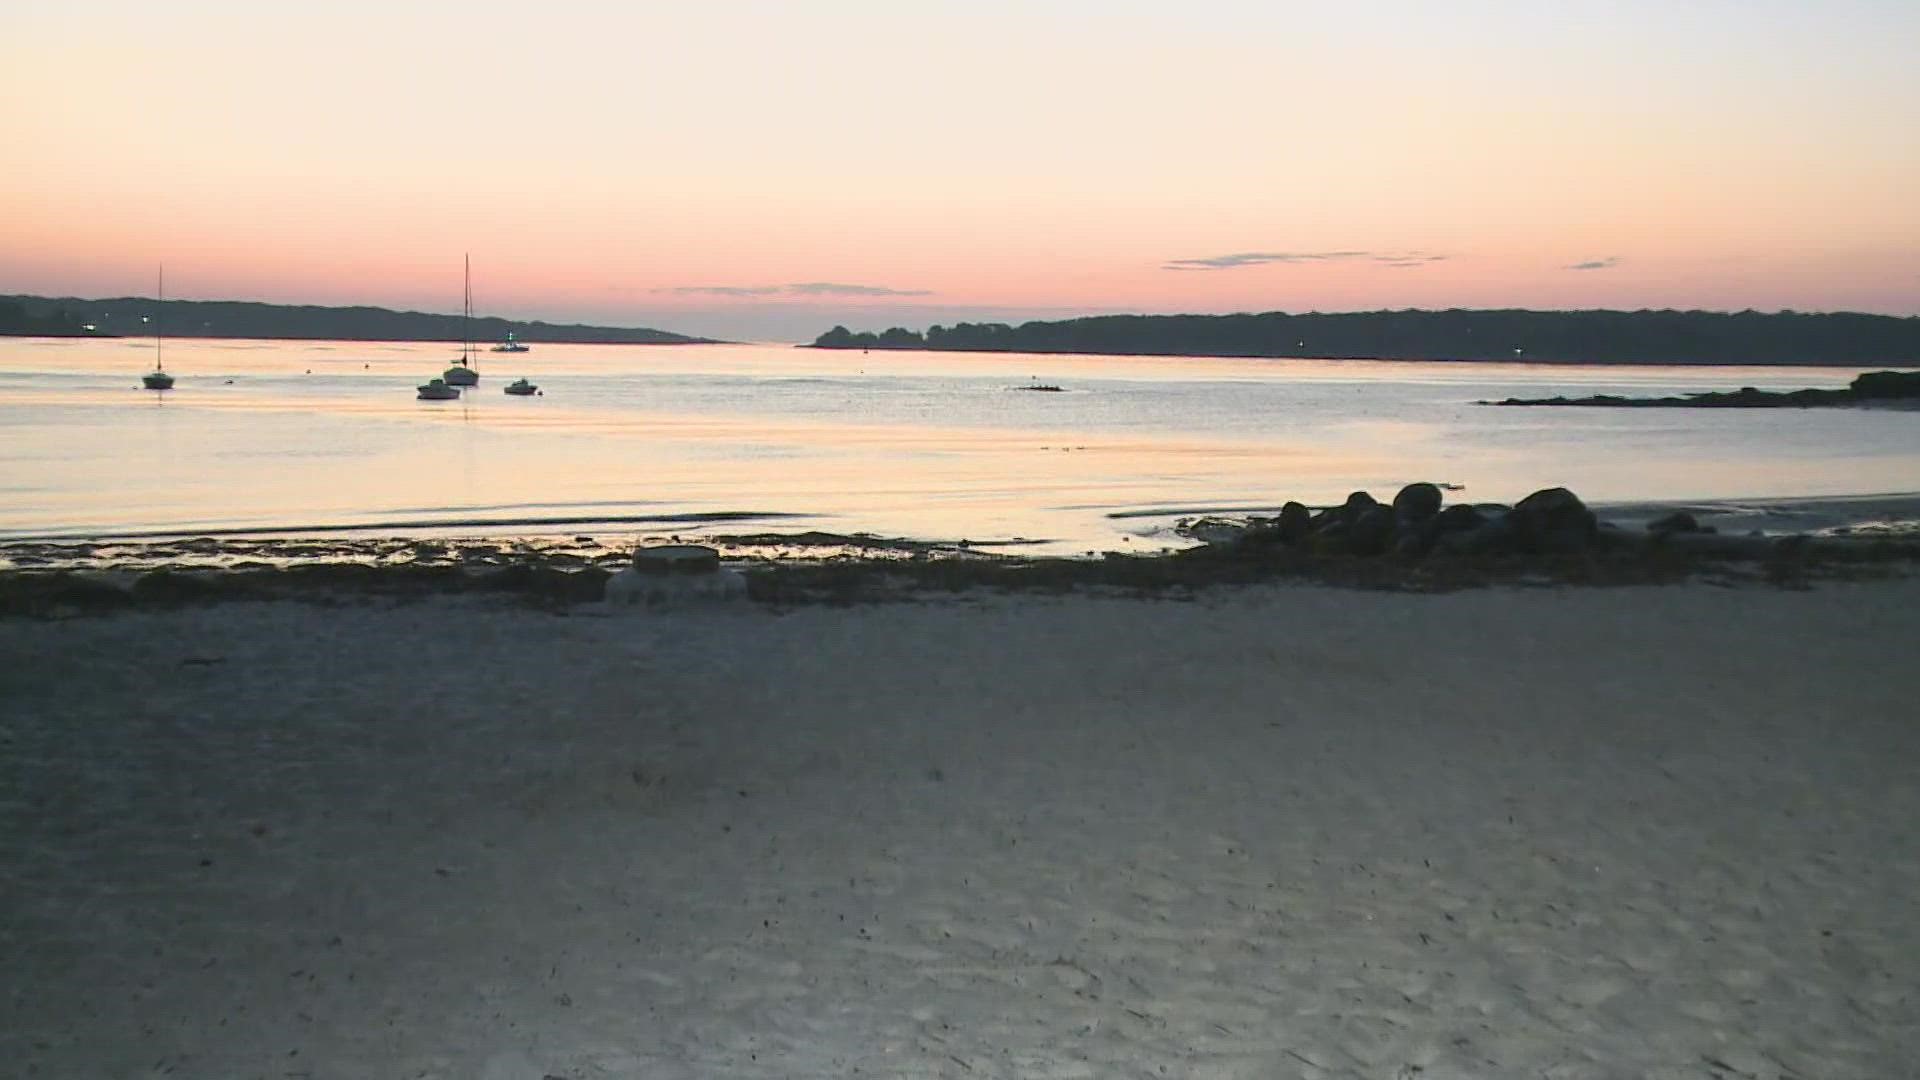 Willard Beach in South Portland is temporarily closed and may have to be closed even longer after a report of a fuel spill, according to the South Portland FD